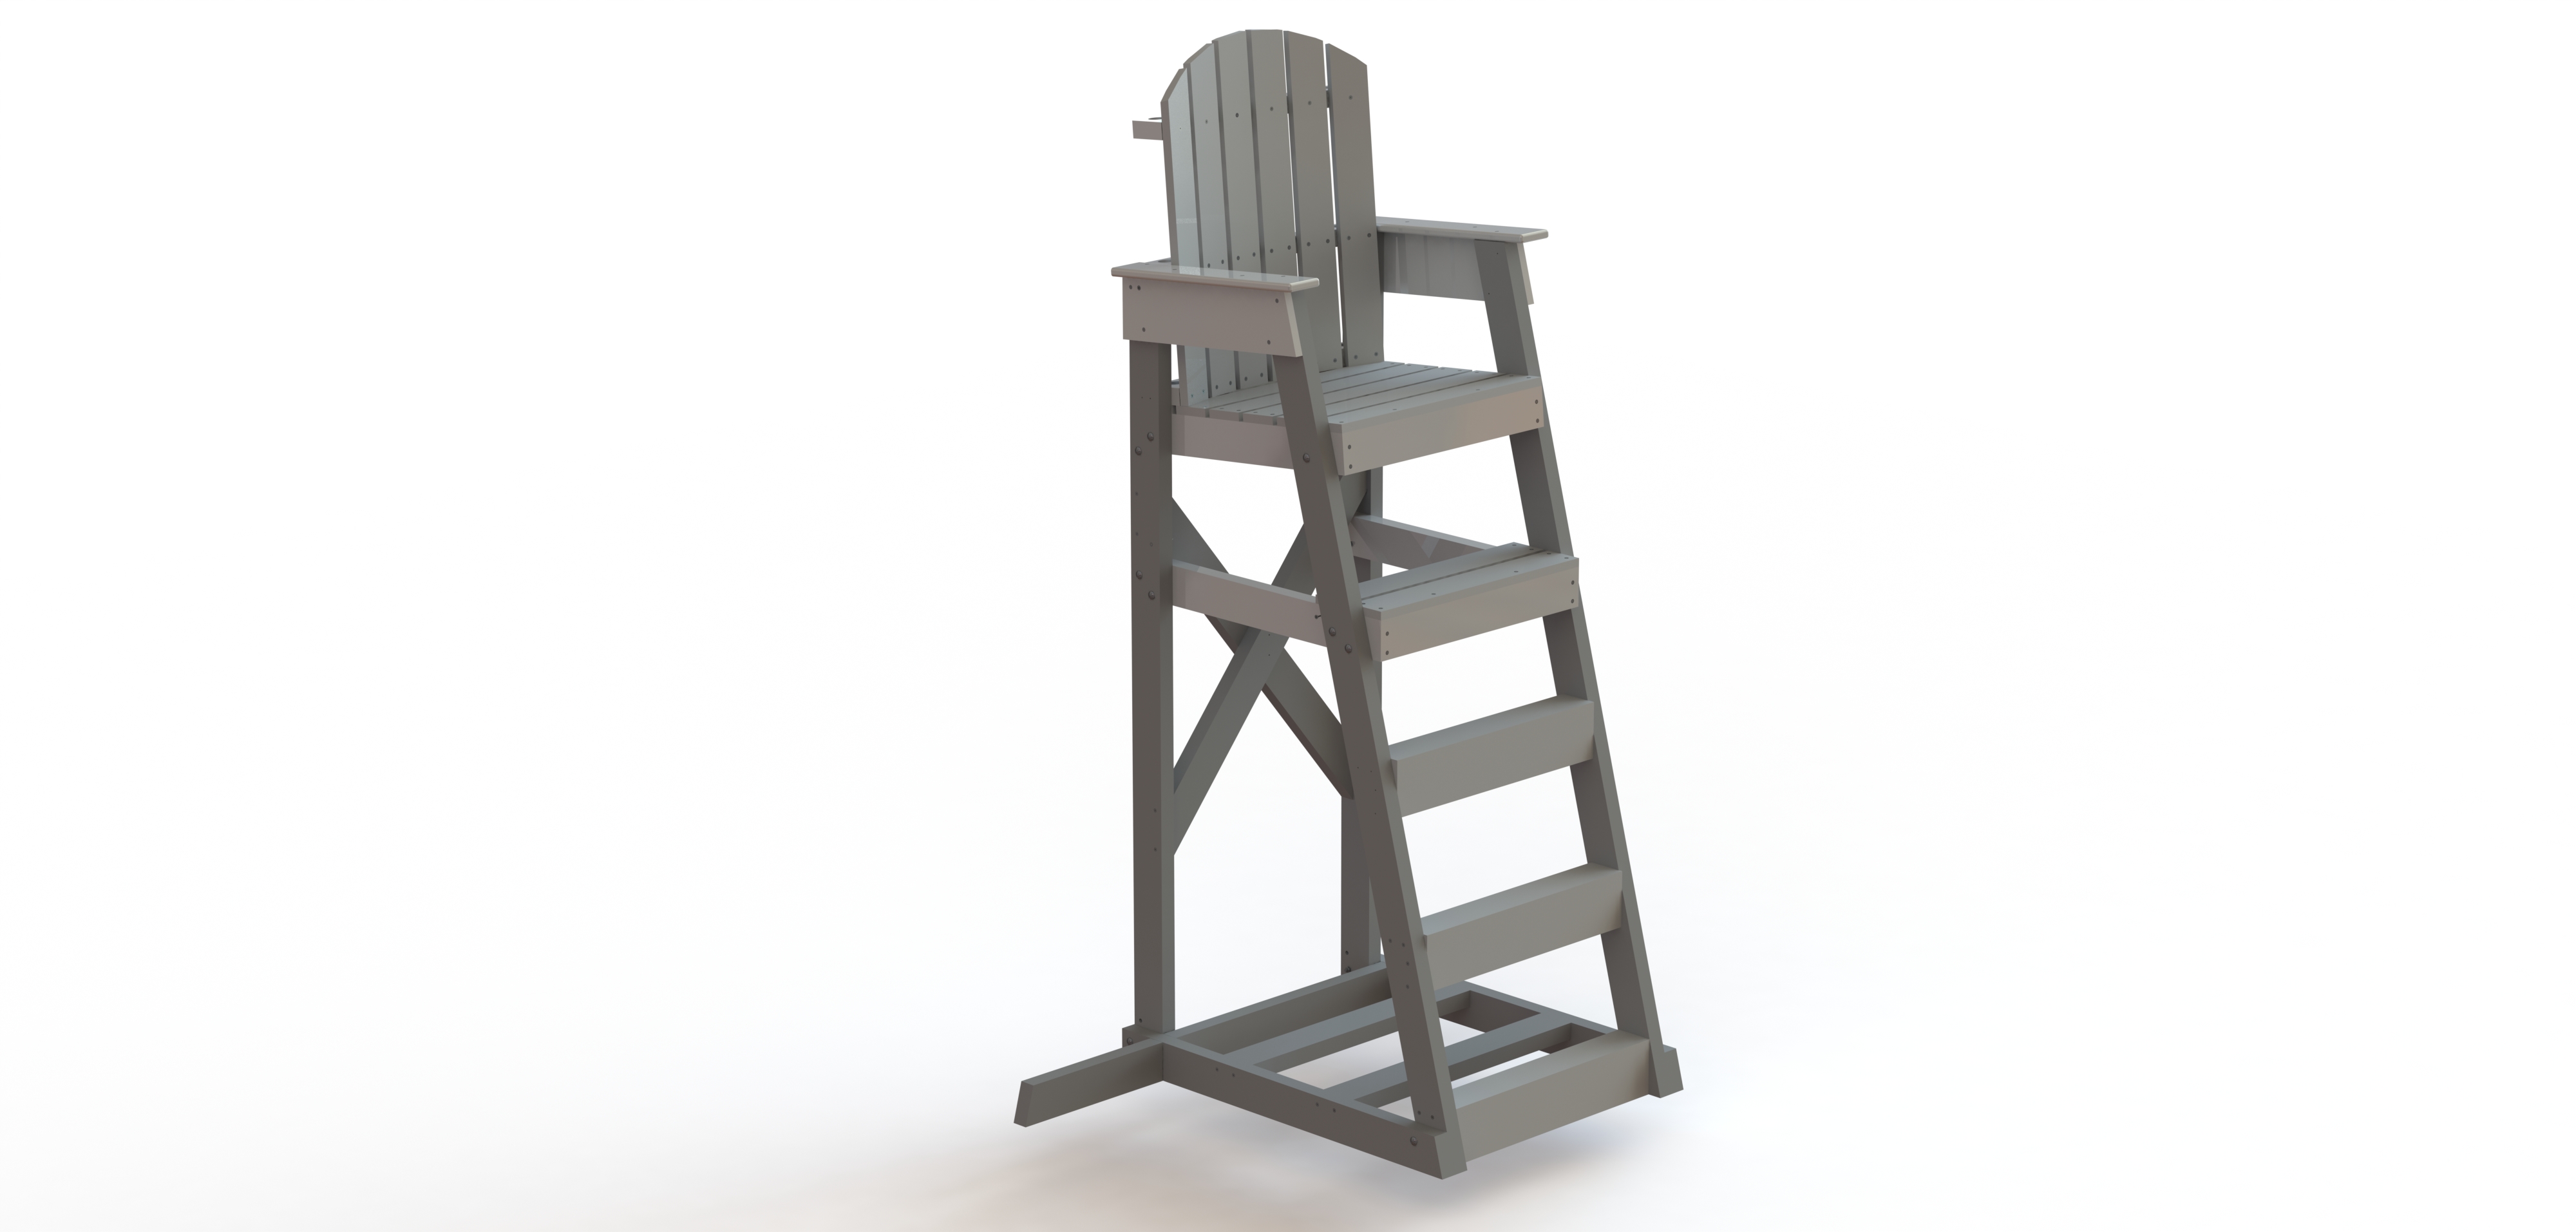 Mendota Lifeguard Chair 5' - Recycled - Spectrum Products